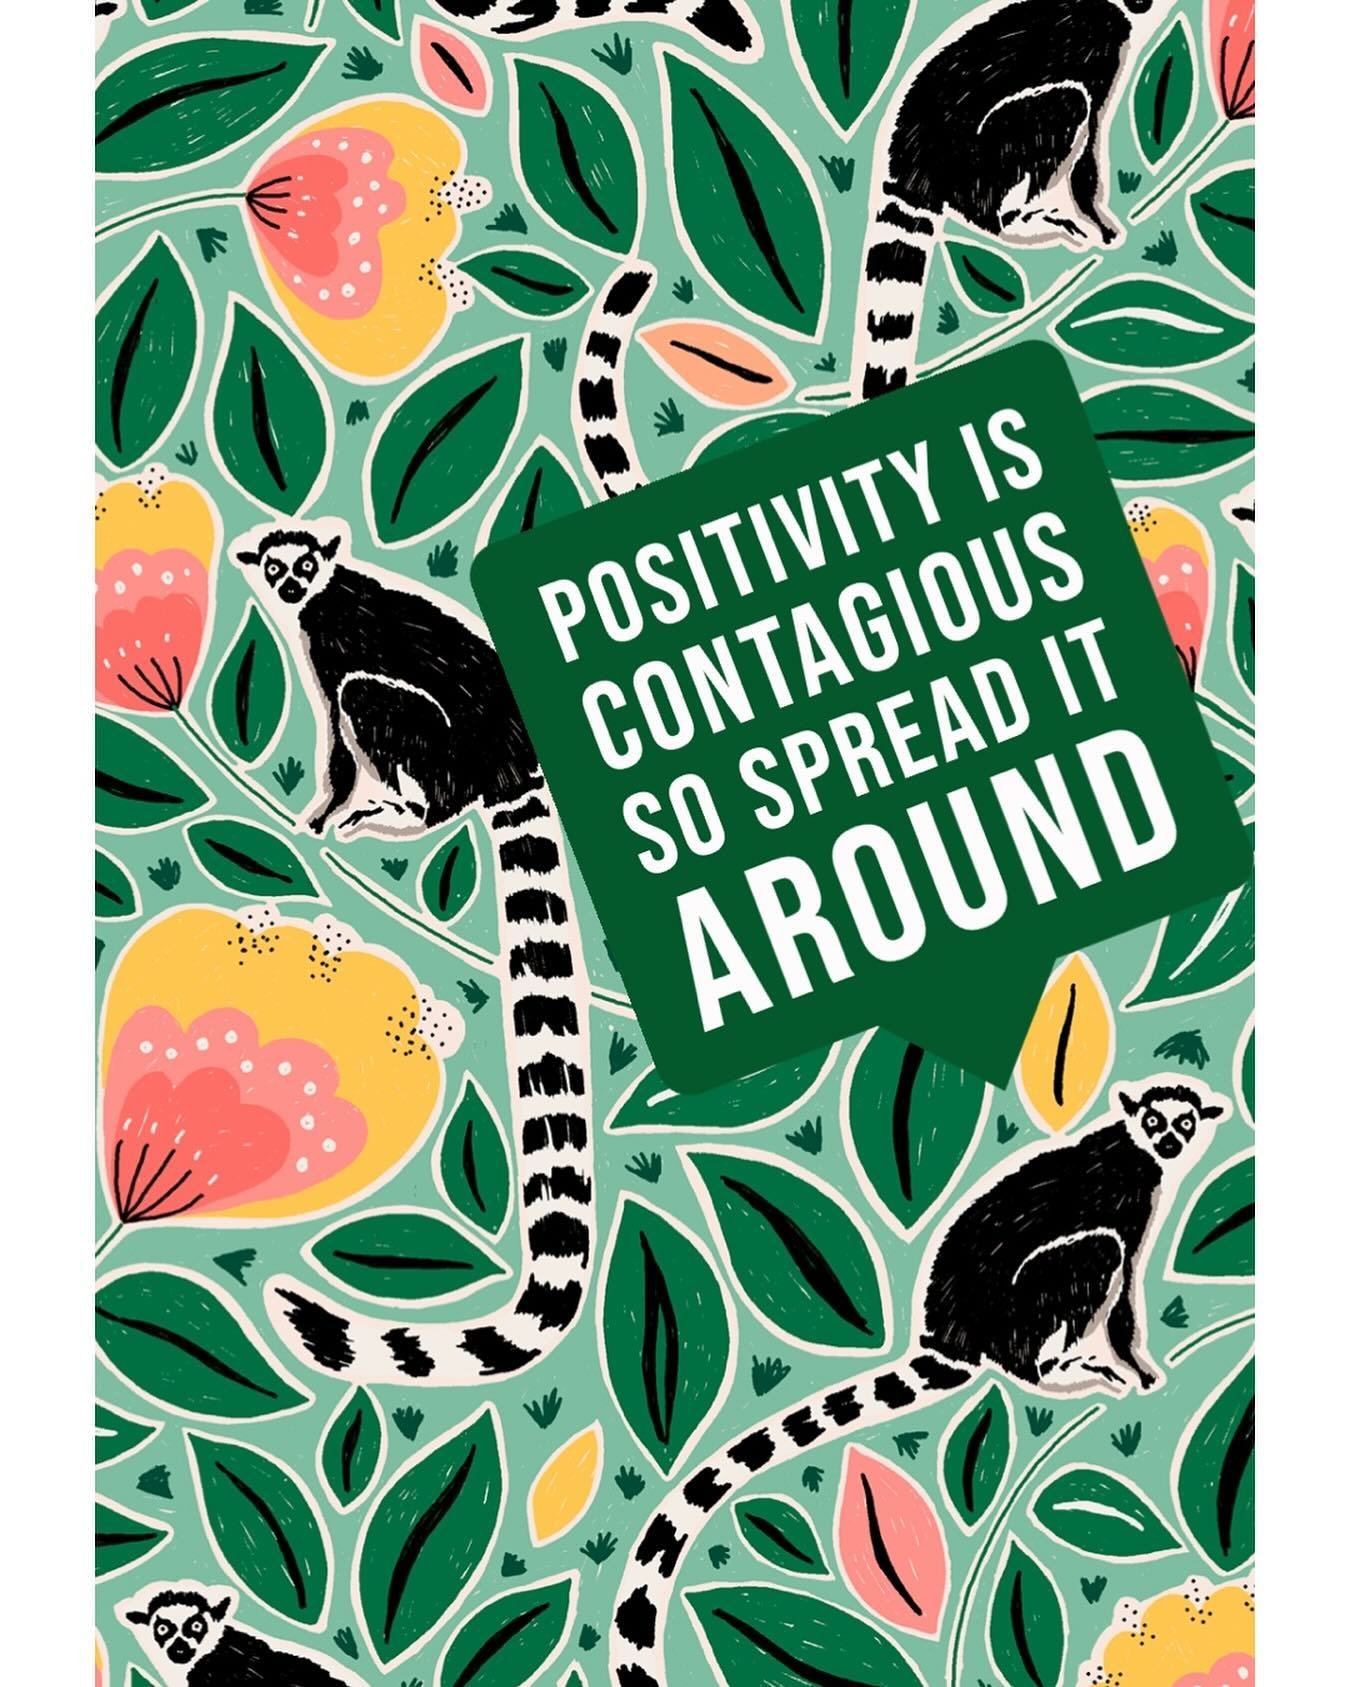 Today&rsquo;s mindset and mantra. I always find that starting Monday off well, starts the week off well. 

#imagesbycassandra_designs #cassandraoleary #positivity #newlettersignup #illustration